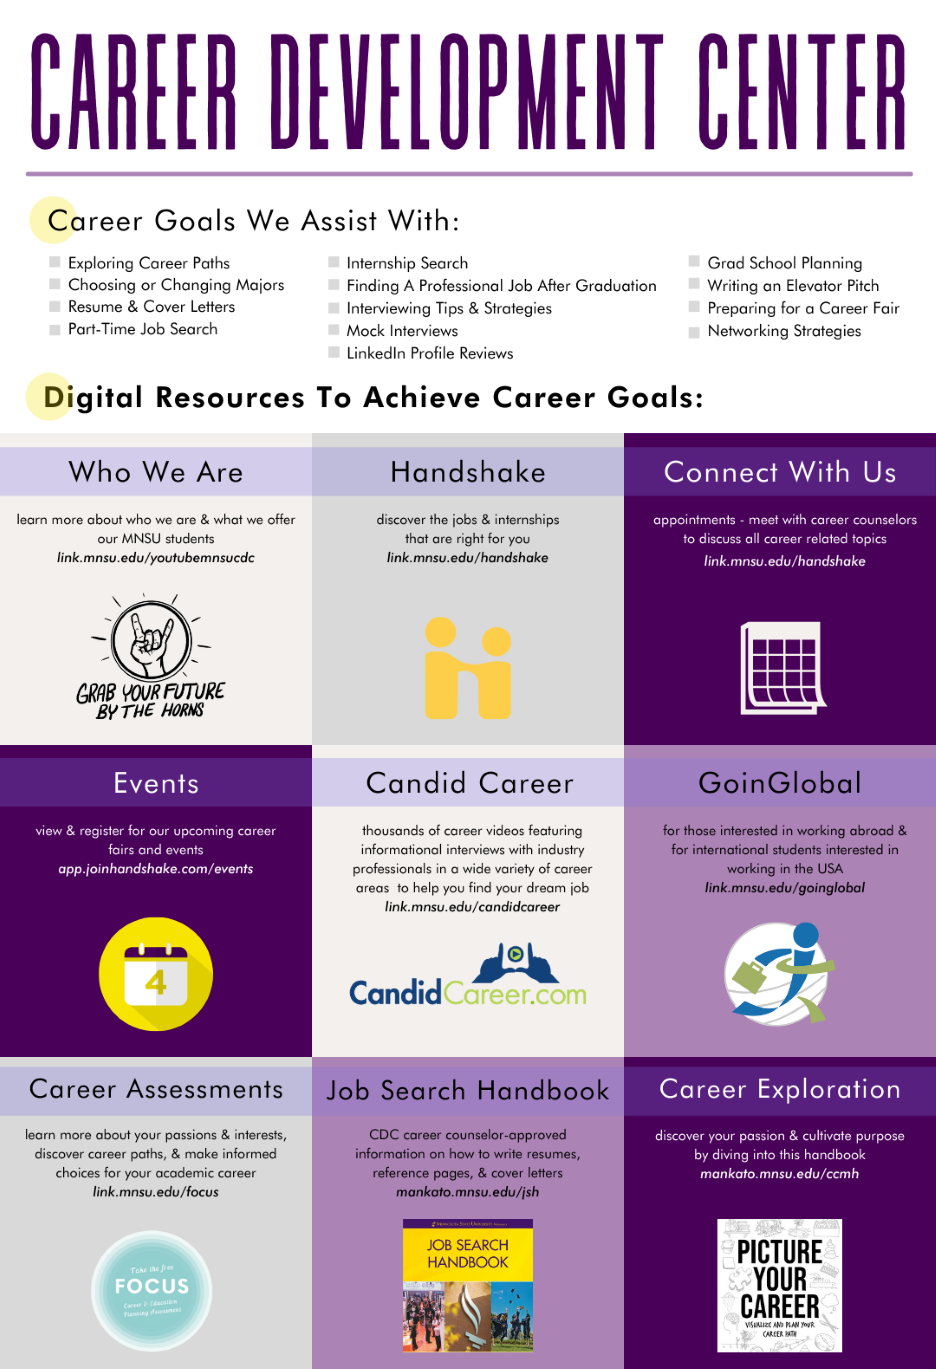 Career Development Center 2021 information and resources card